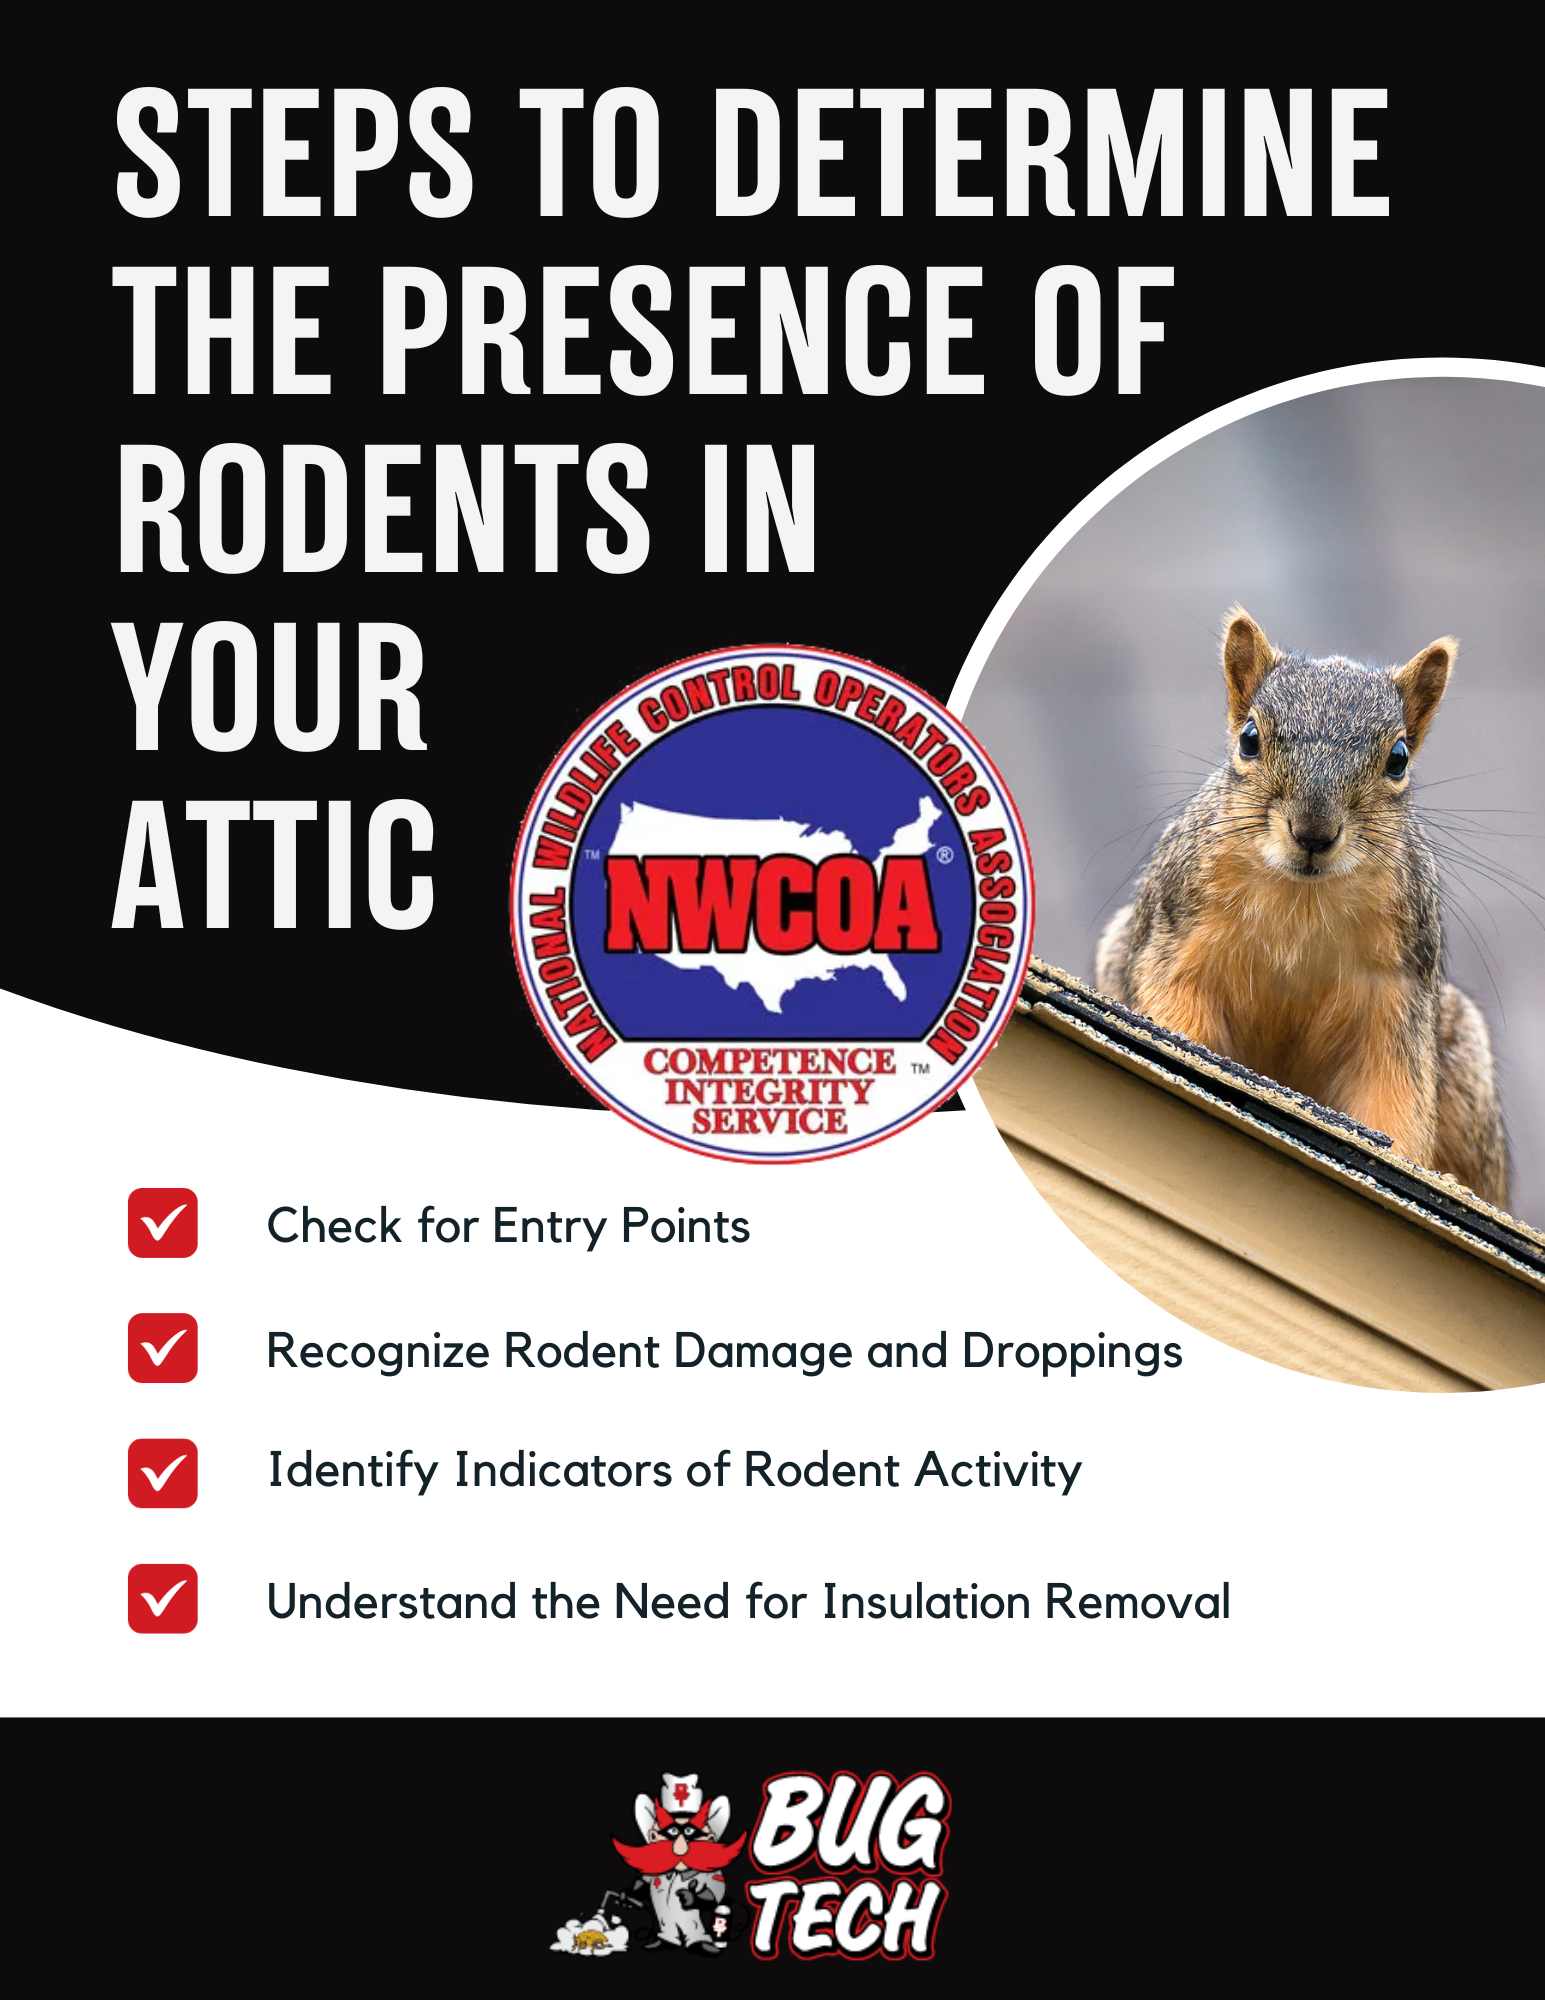 Steps-to-Determine-the-Presence-of-Rodents-in-Your-Attic.png